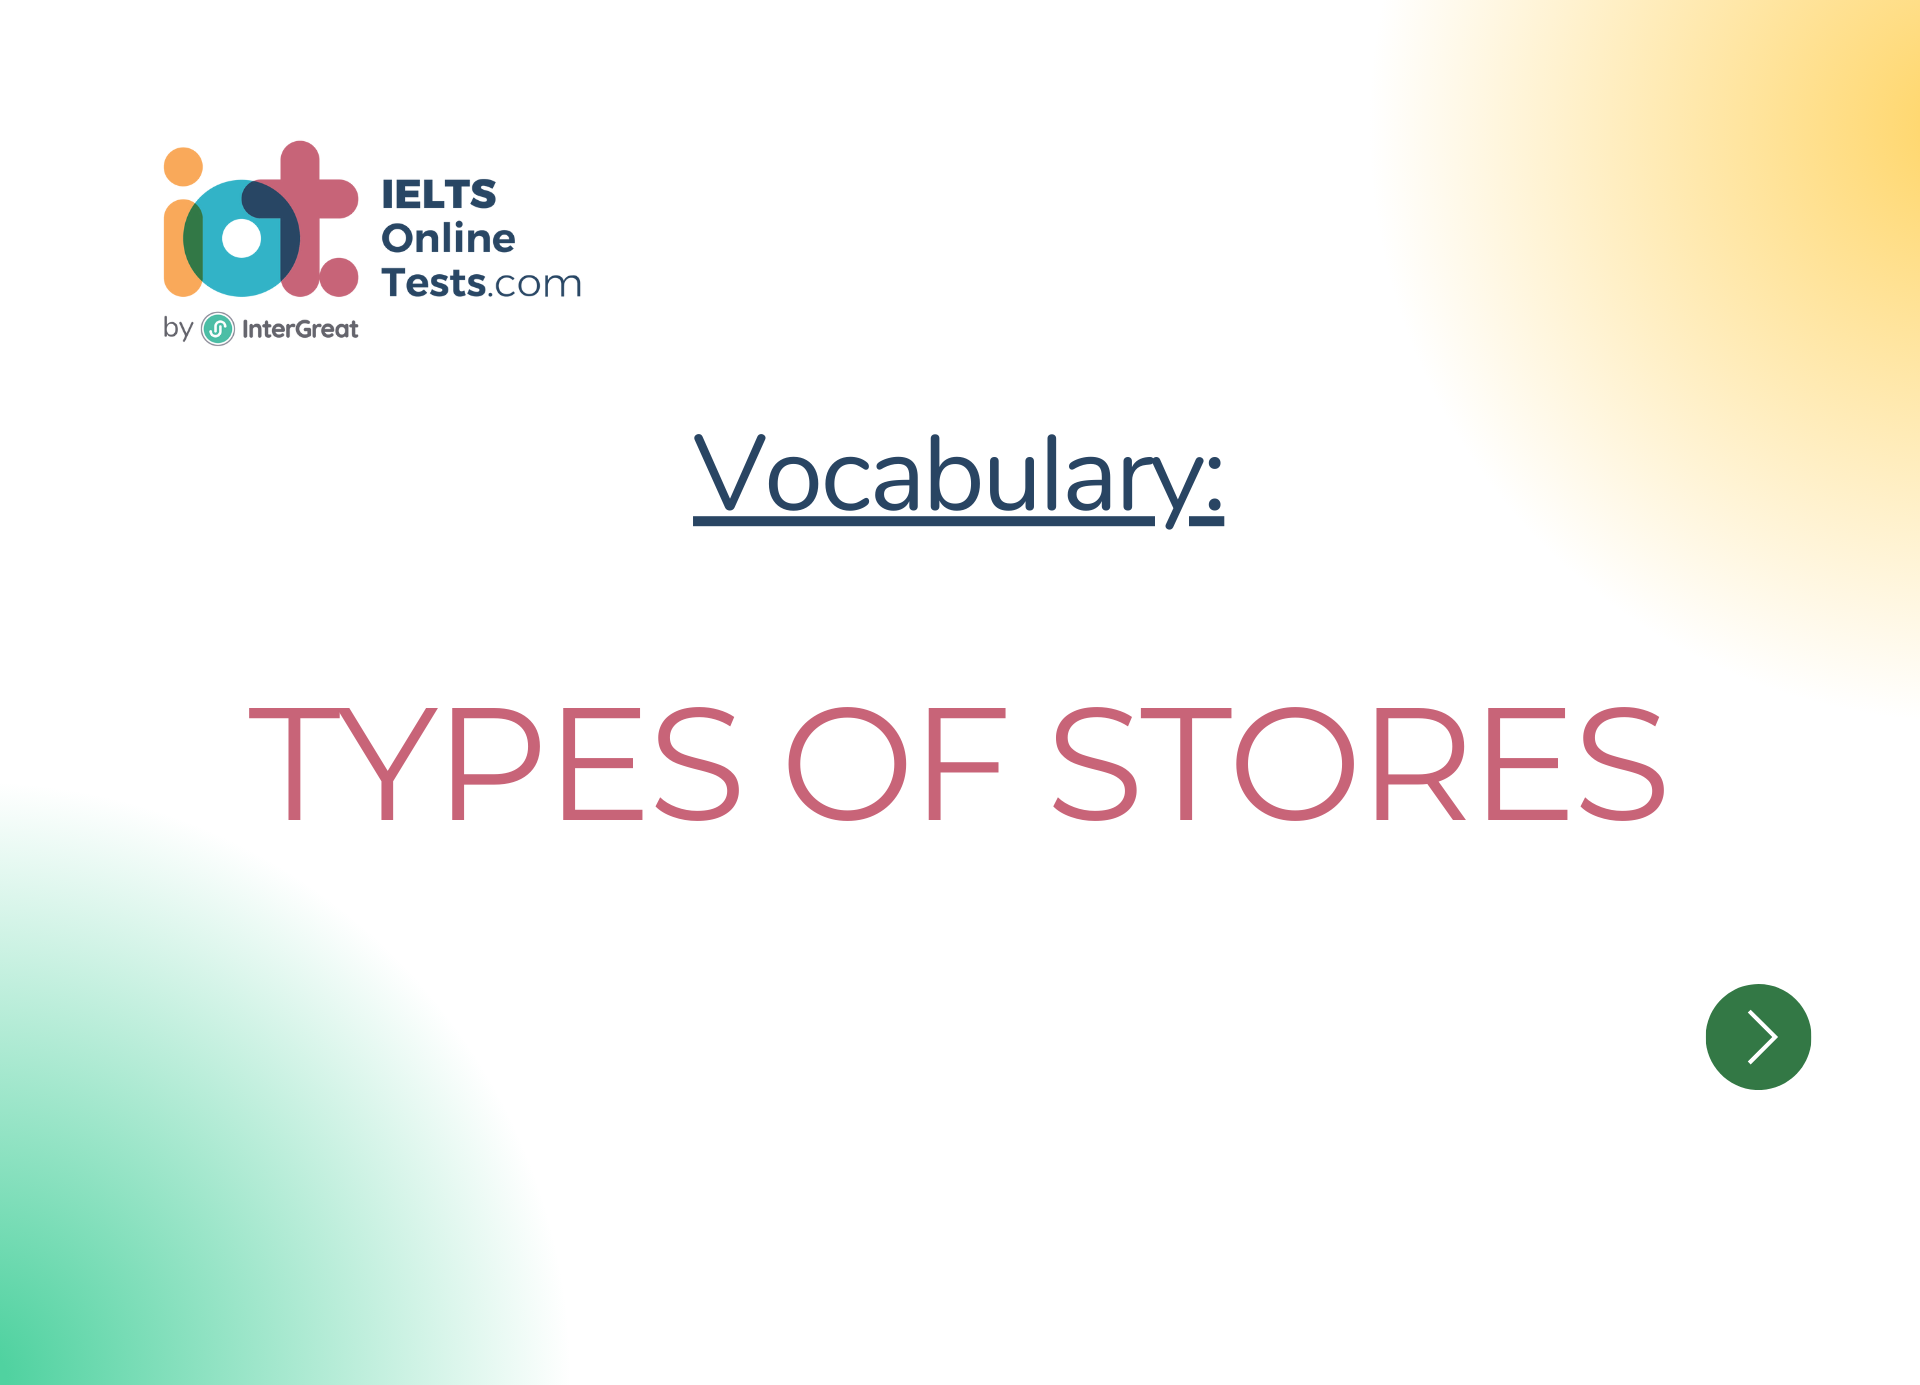 Types of stores